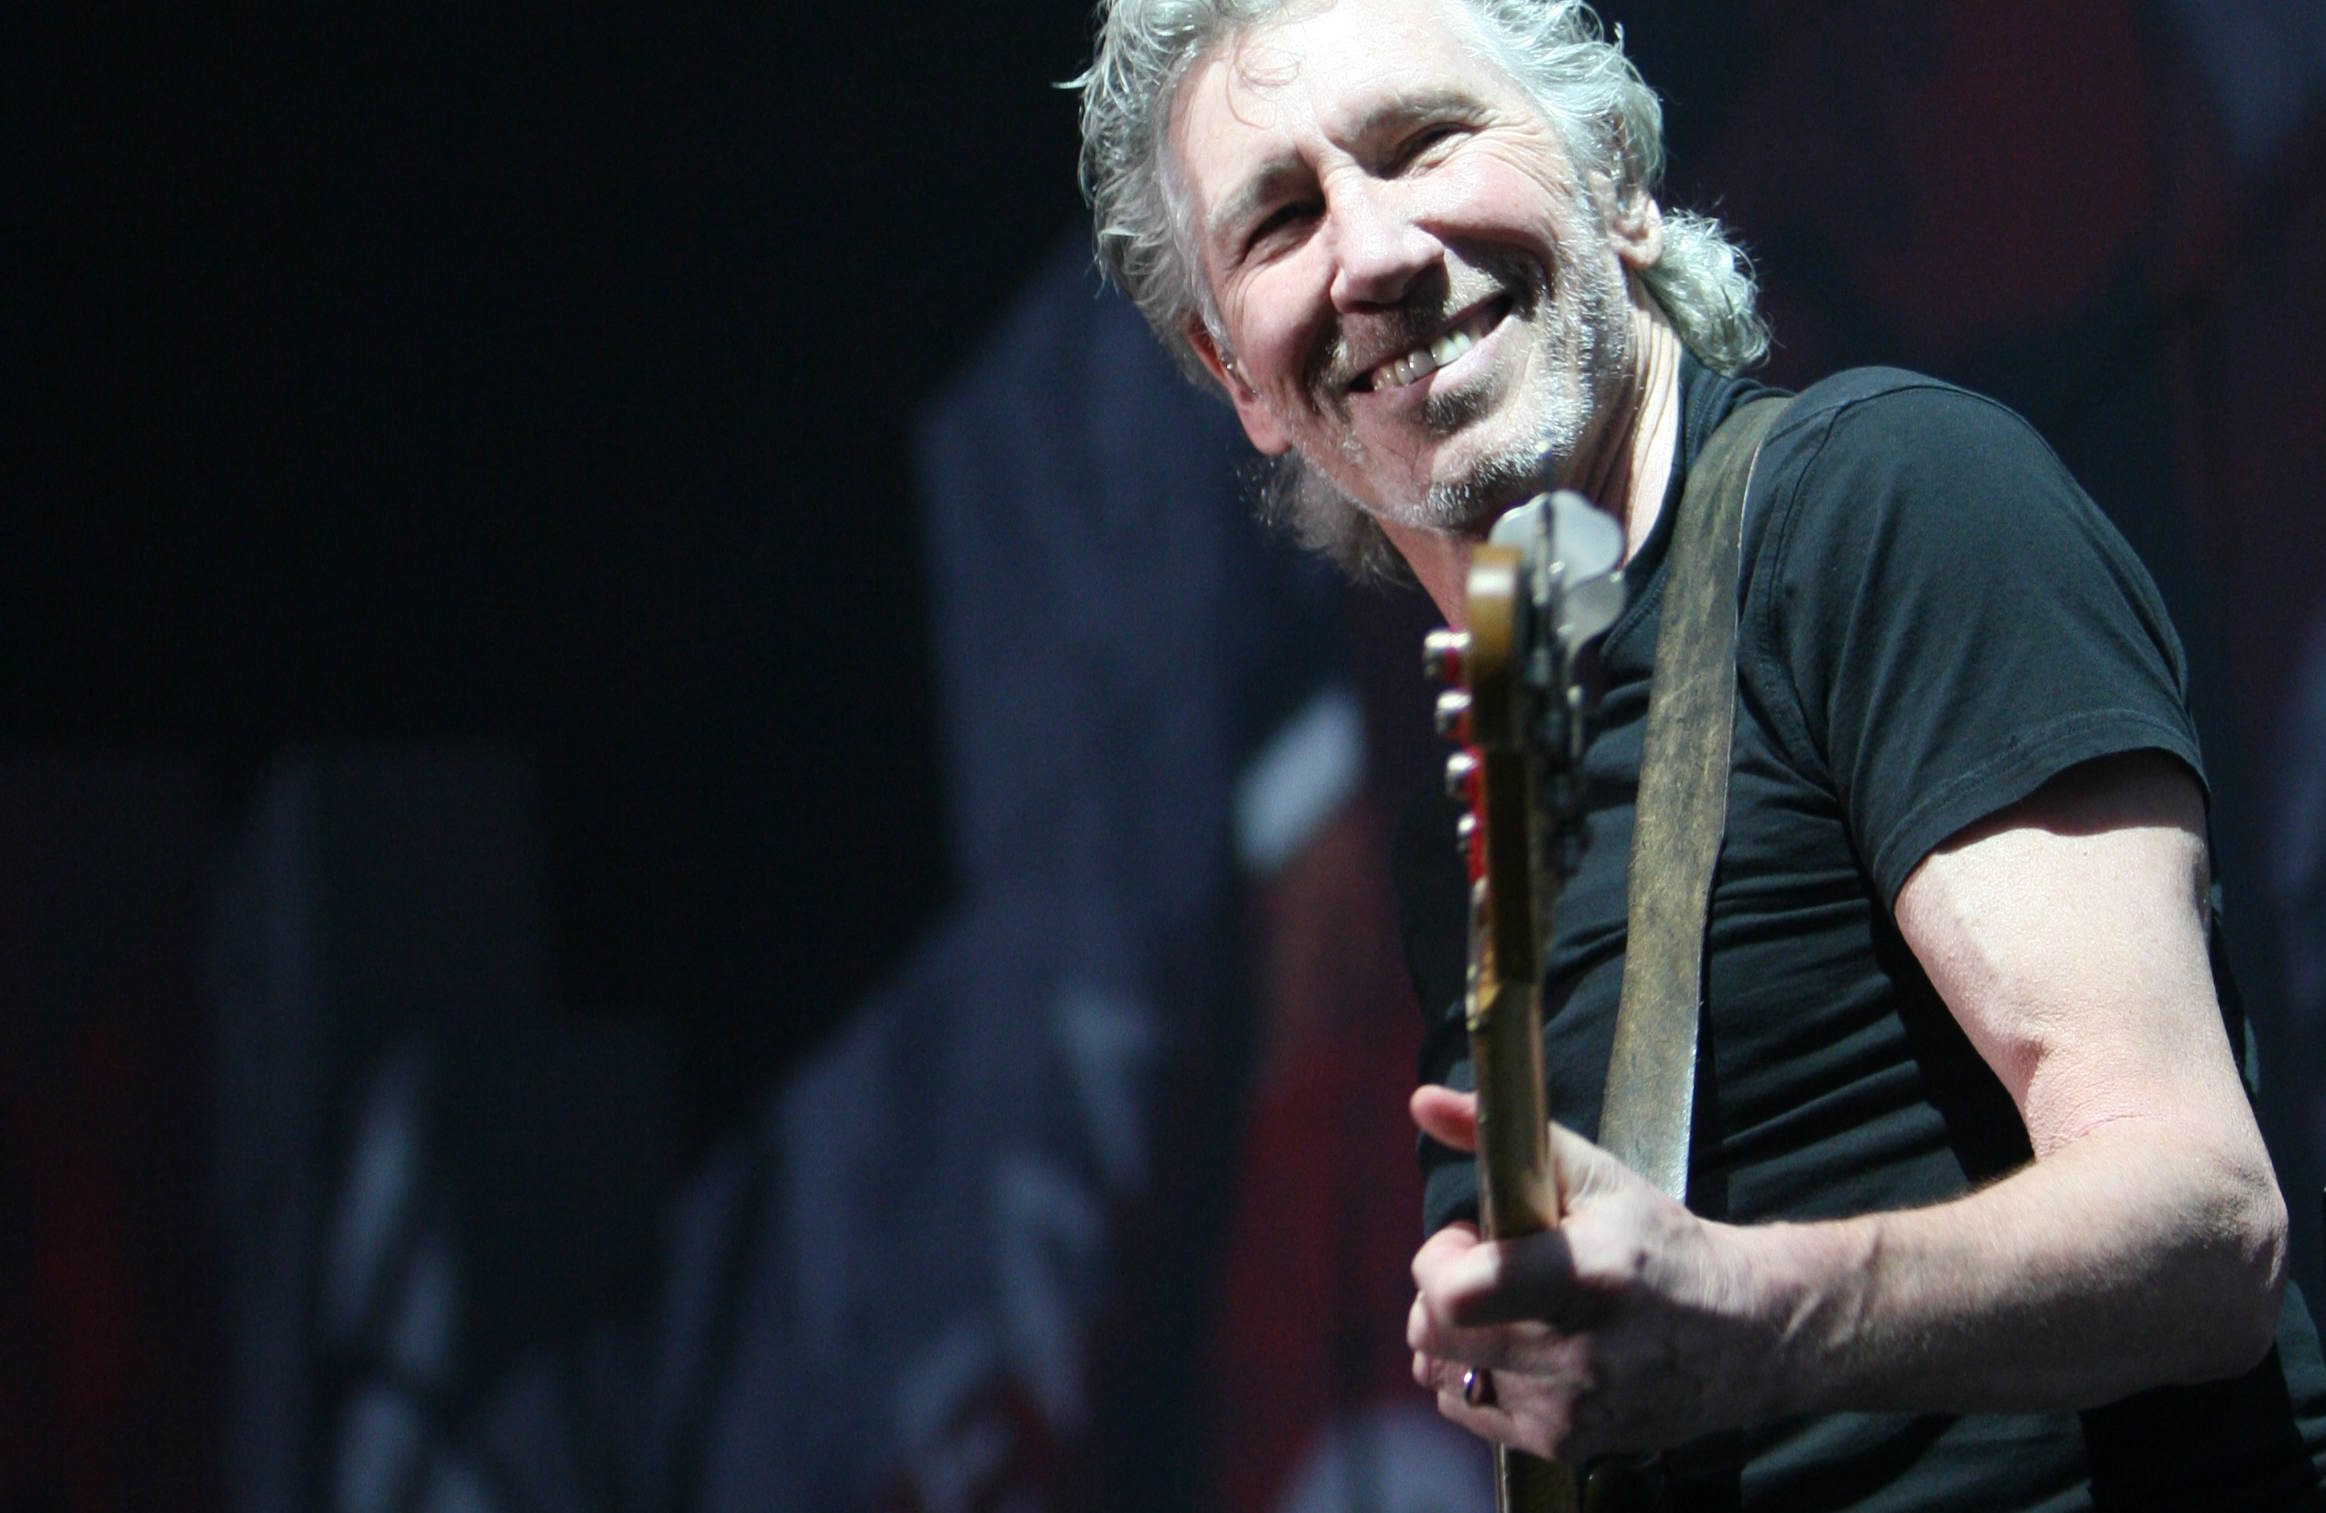 Roger Waters by Alterna2 CC-BY-2.0